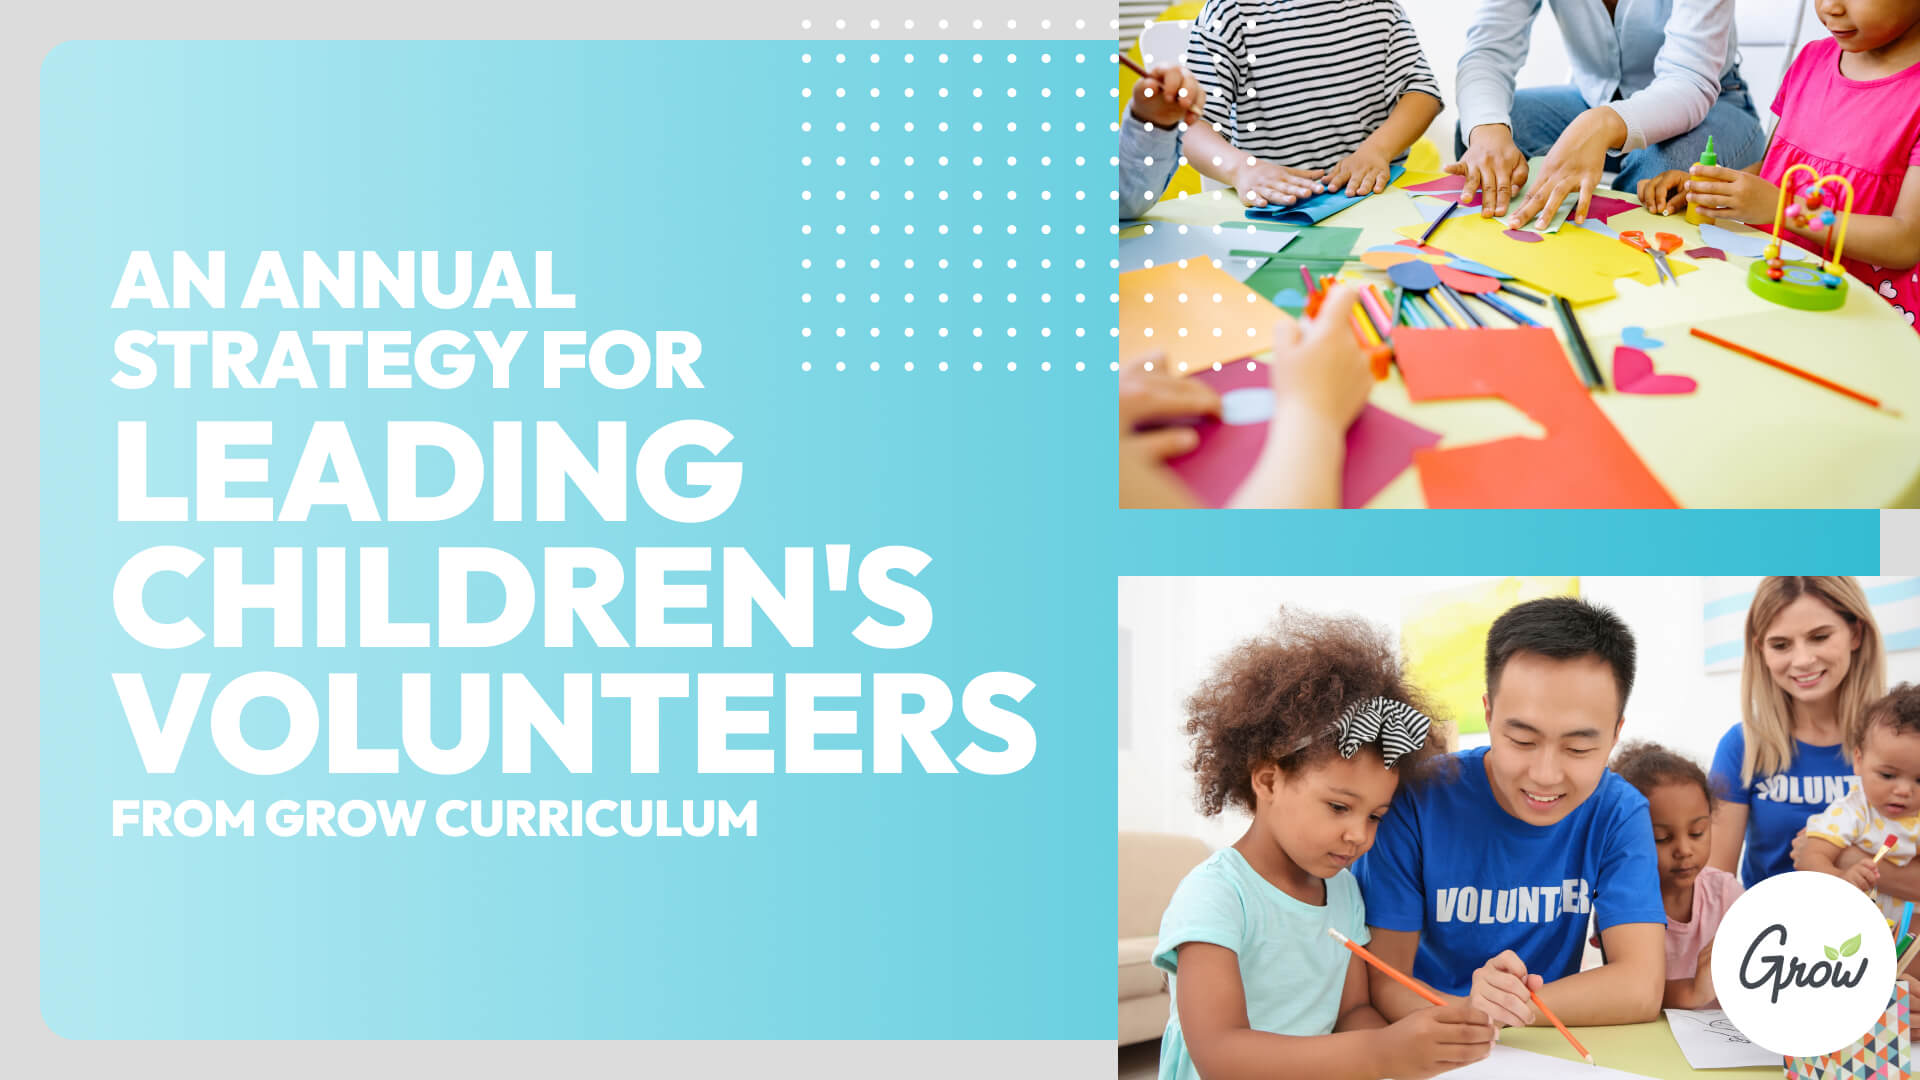 An Annual Strategy for Leading Children's Volunteers from Grow Curriculum